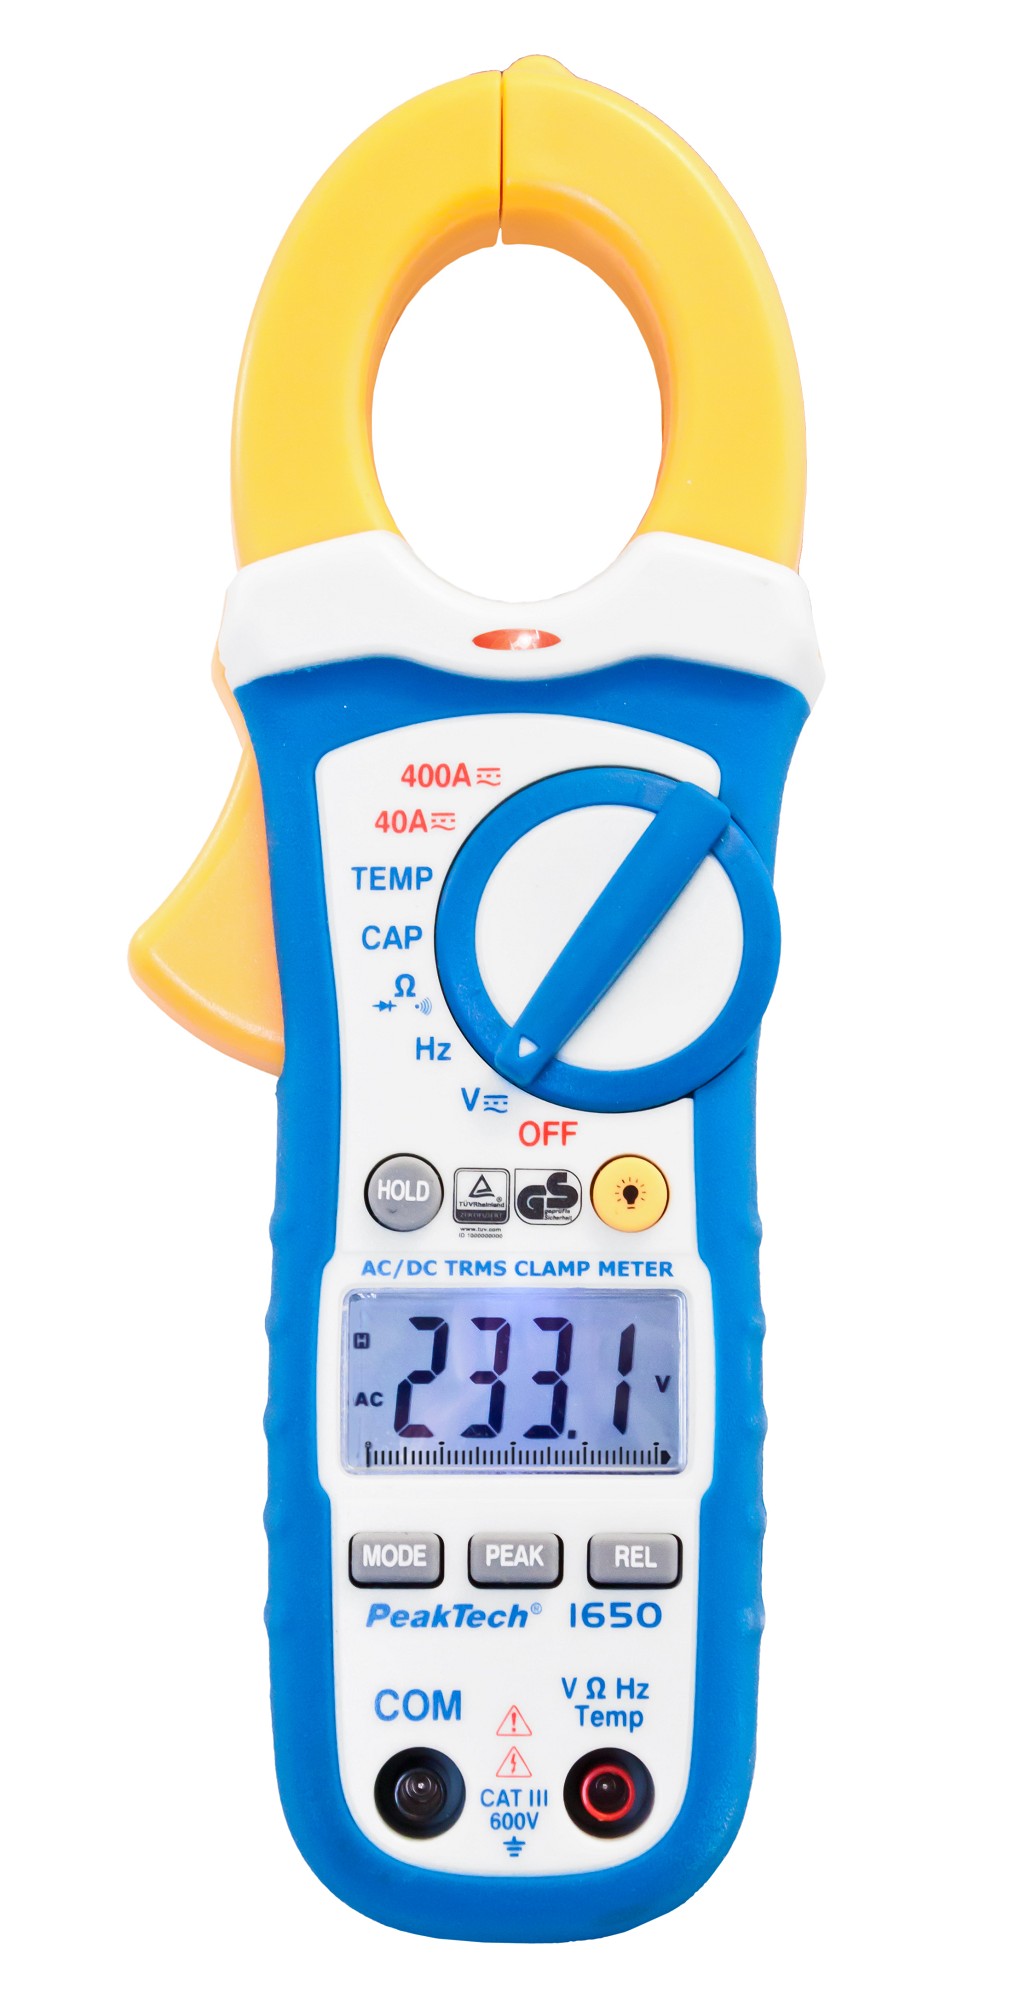 «PeakTech® P 1650» TrueRMS clamp meter 4,000 counts 400 A AC/DC